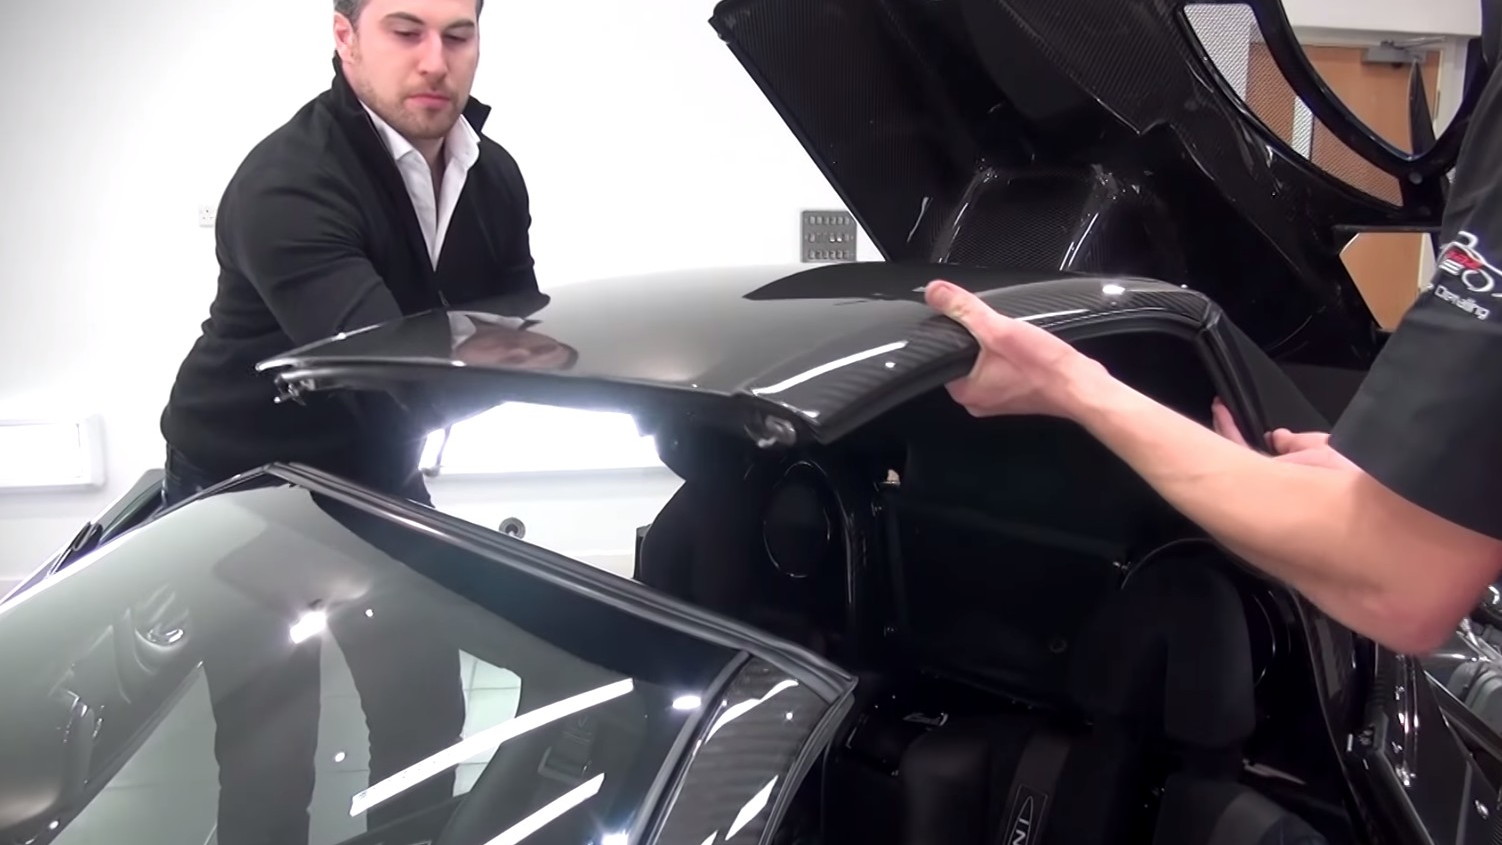 Removing the roof of a Pagani Zonda 760 Roadster